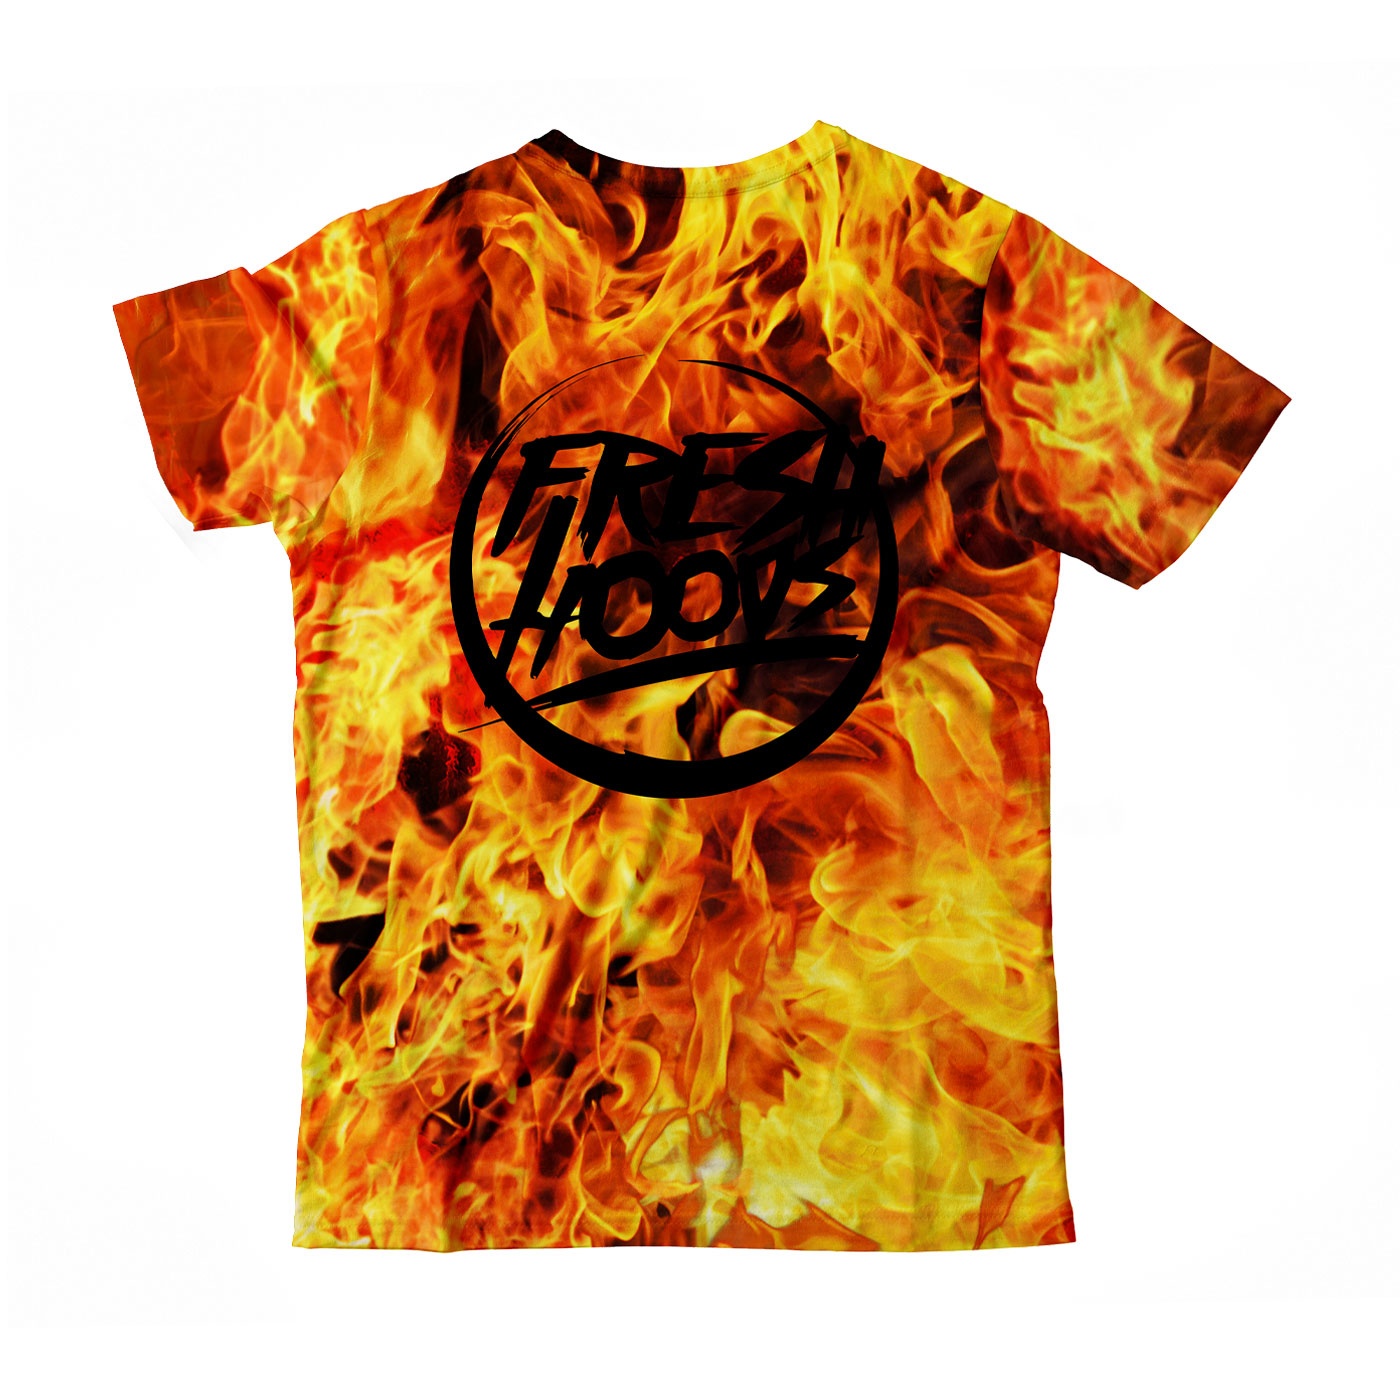 Stay Cool and Stylish with Our Fresh Flames T-Shirt Collection